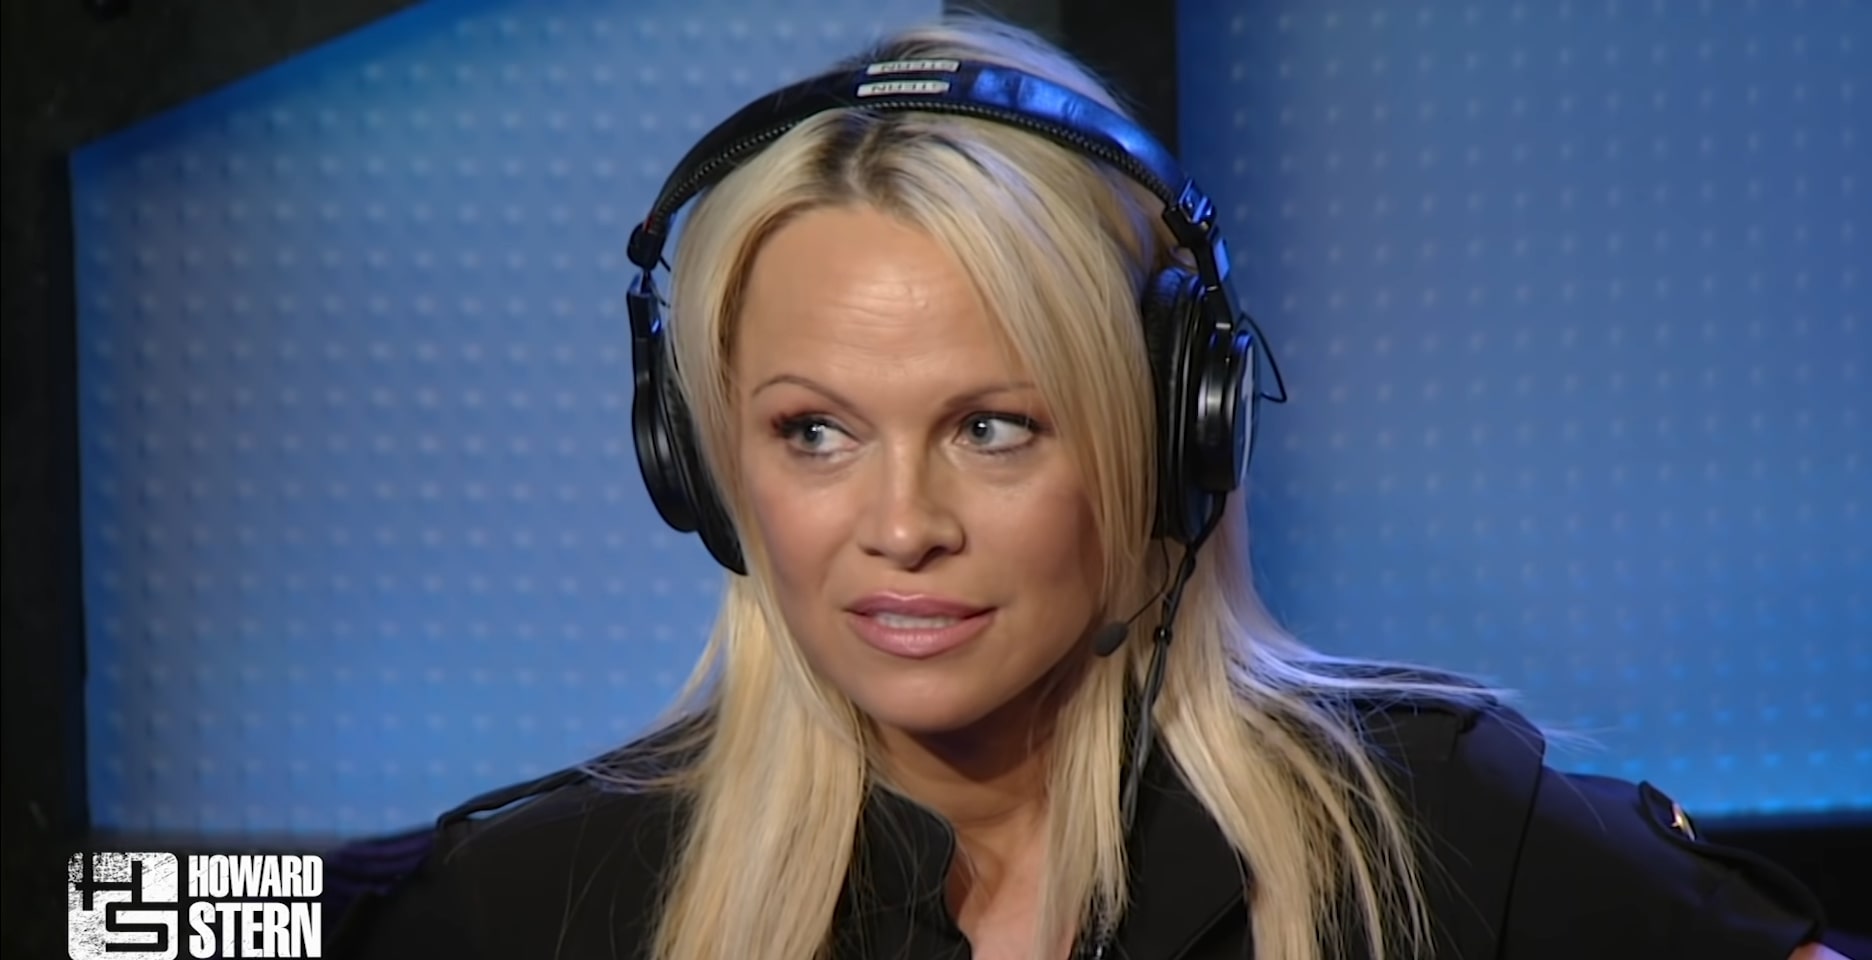 What is Pamela Anderson’s Net Worth?